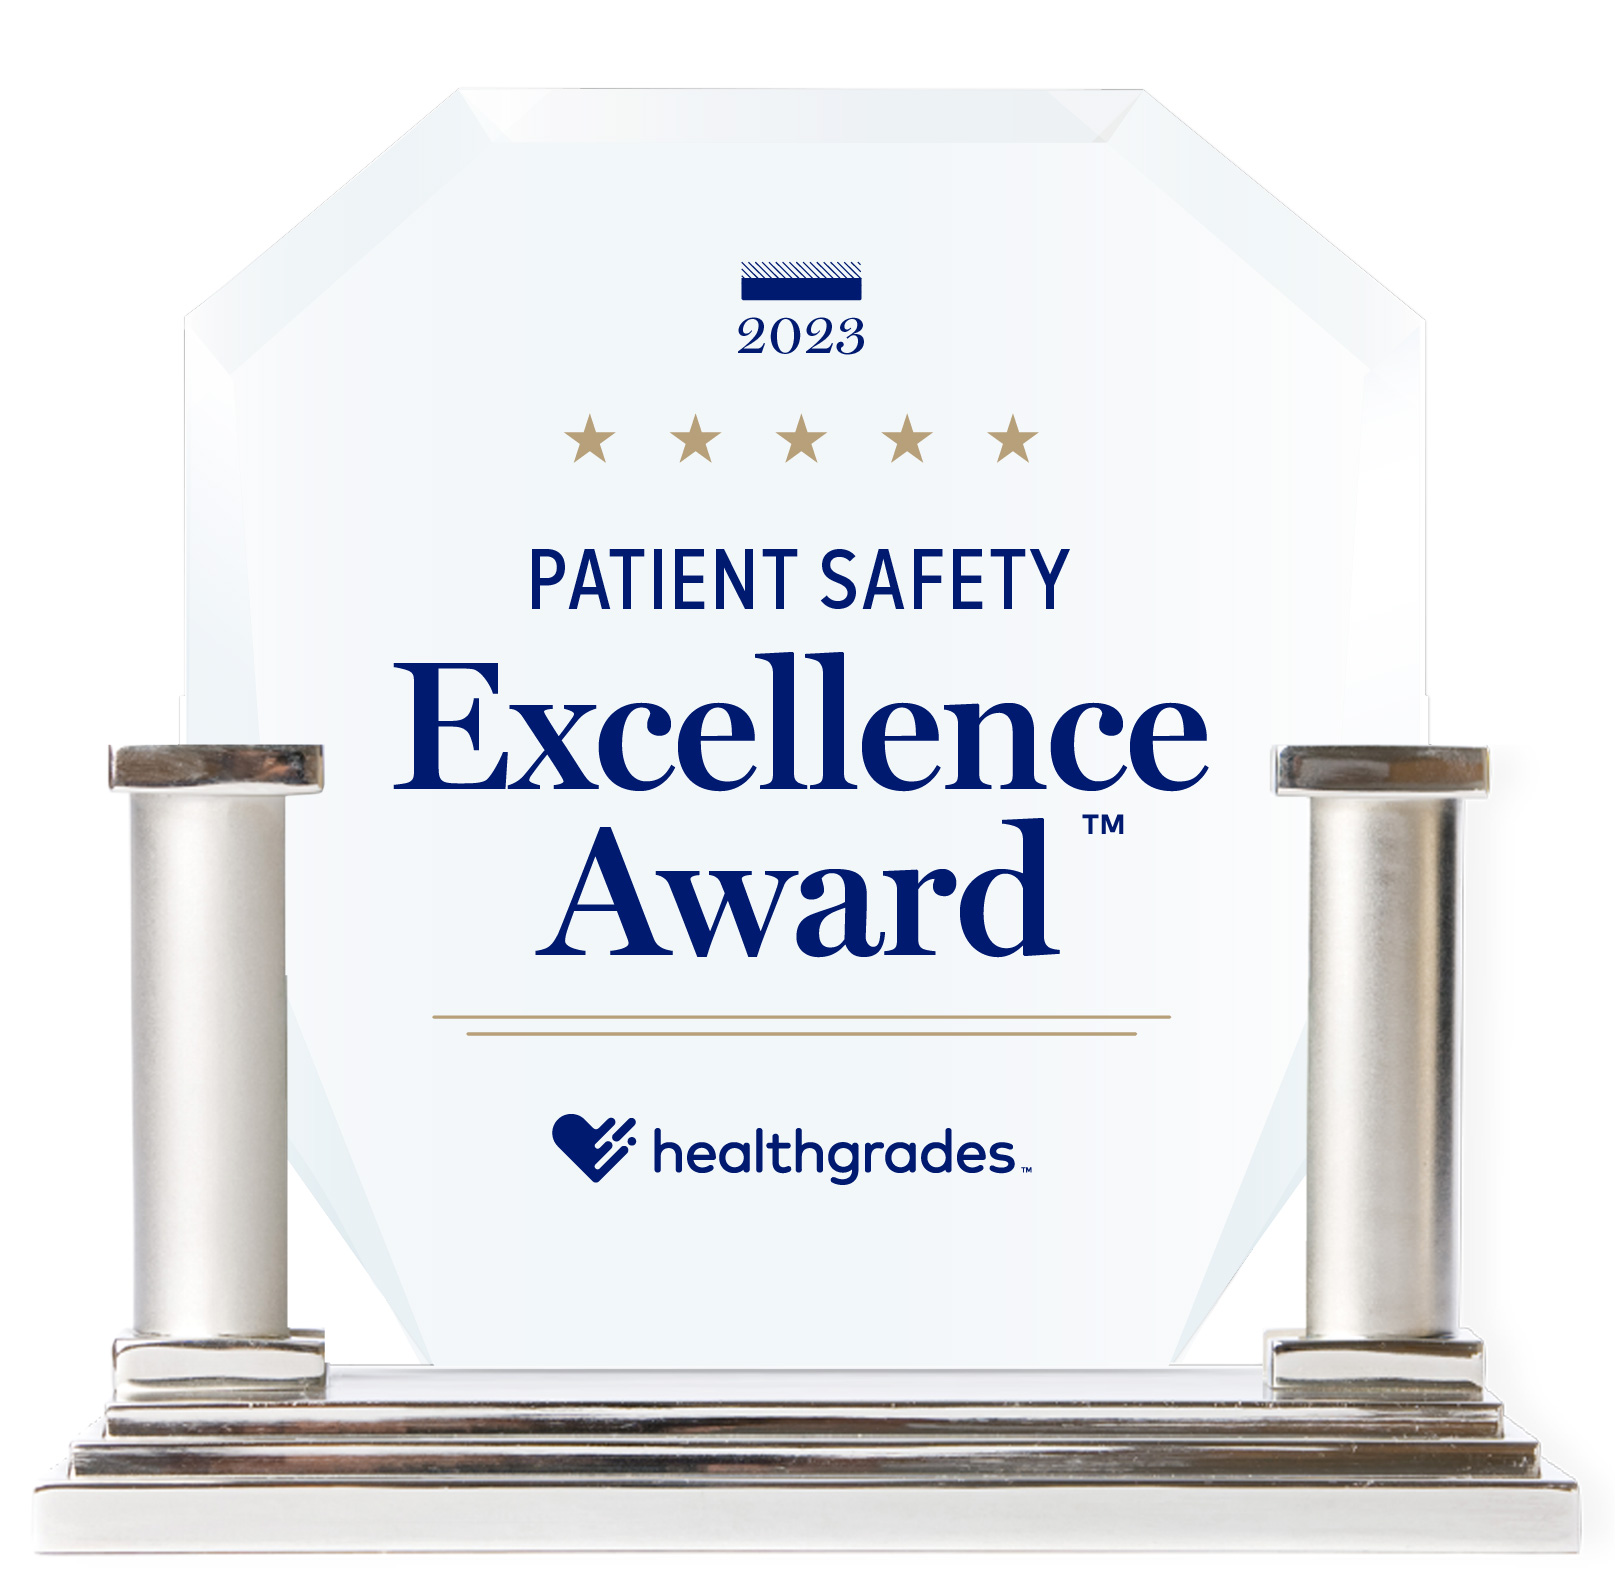 Patient Safety Excellence Award Trophy